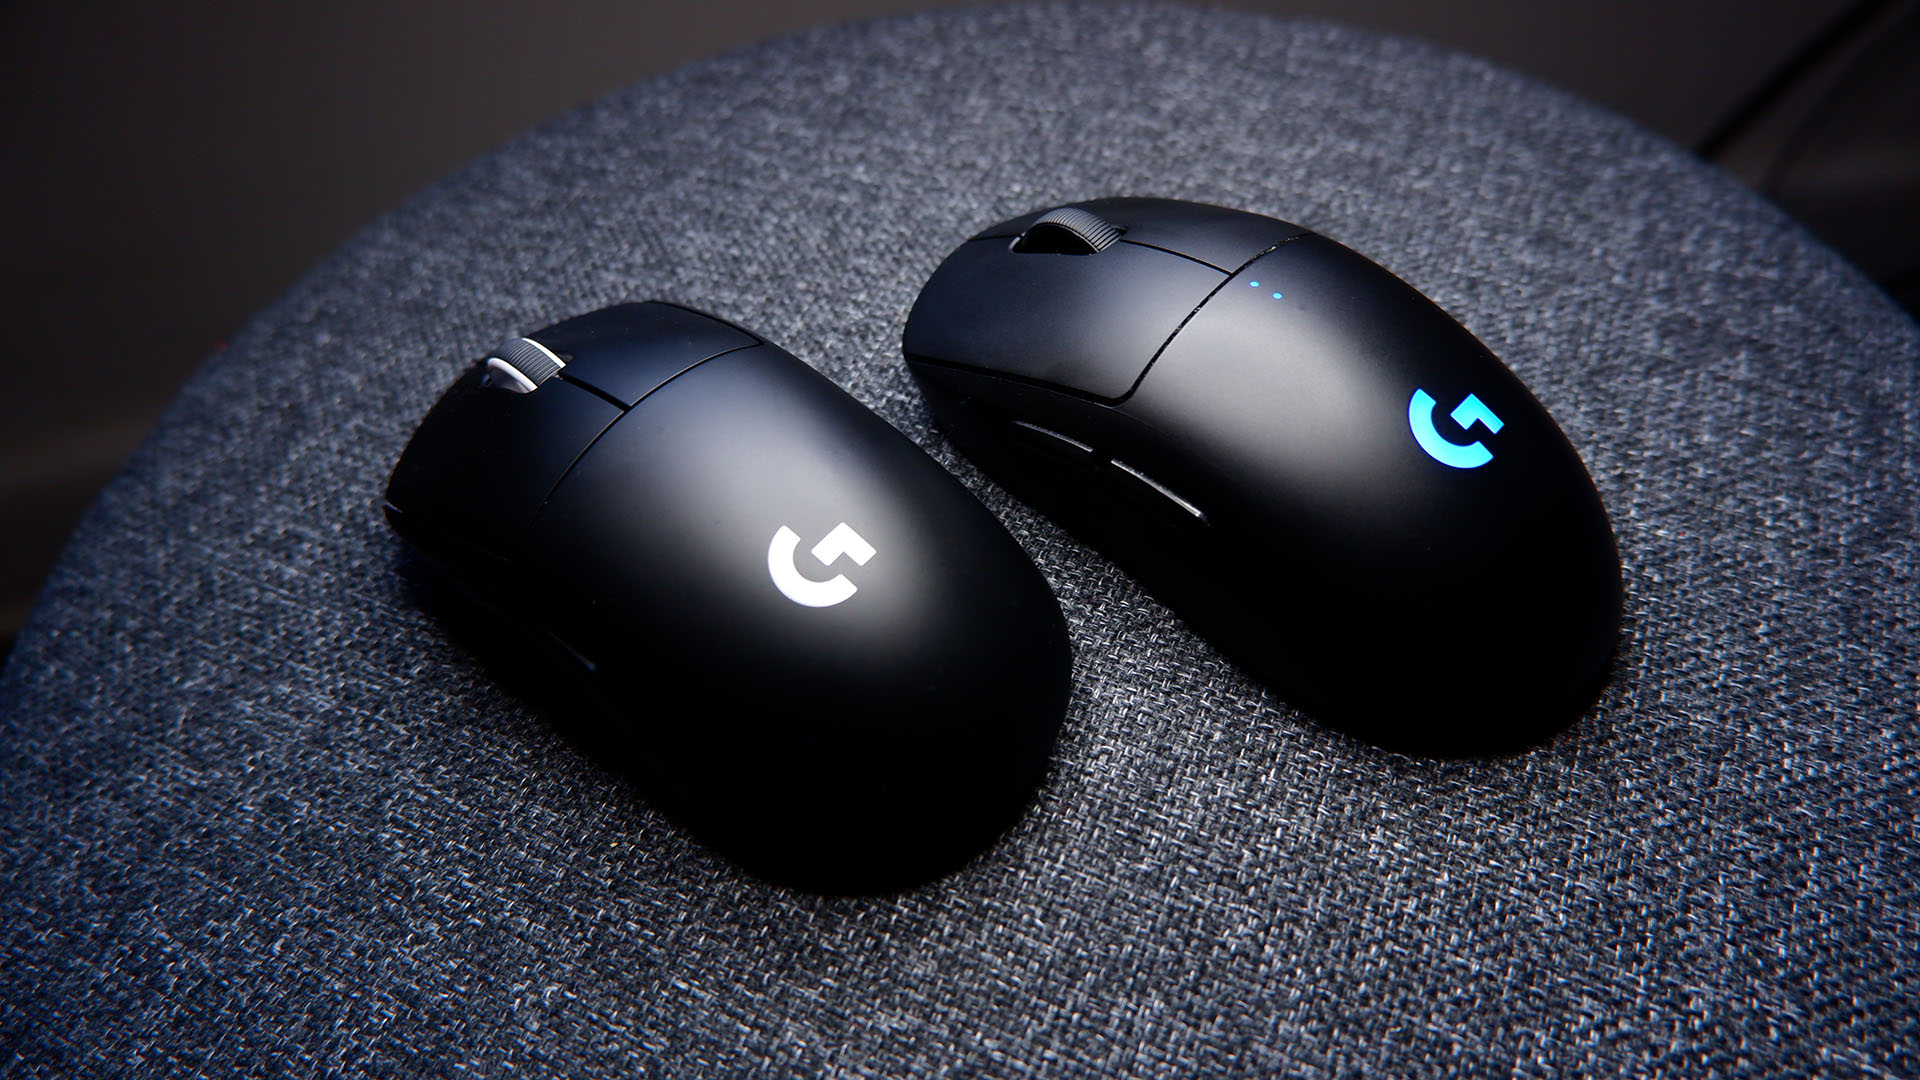 Logitech G Pro X Superlight gaming mouse pictured with dark background